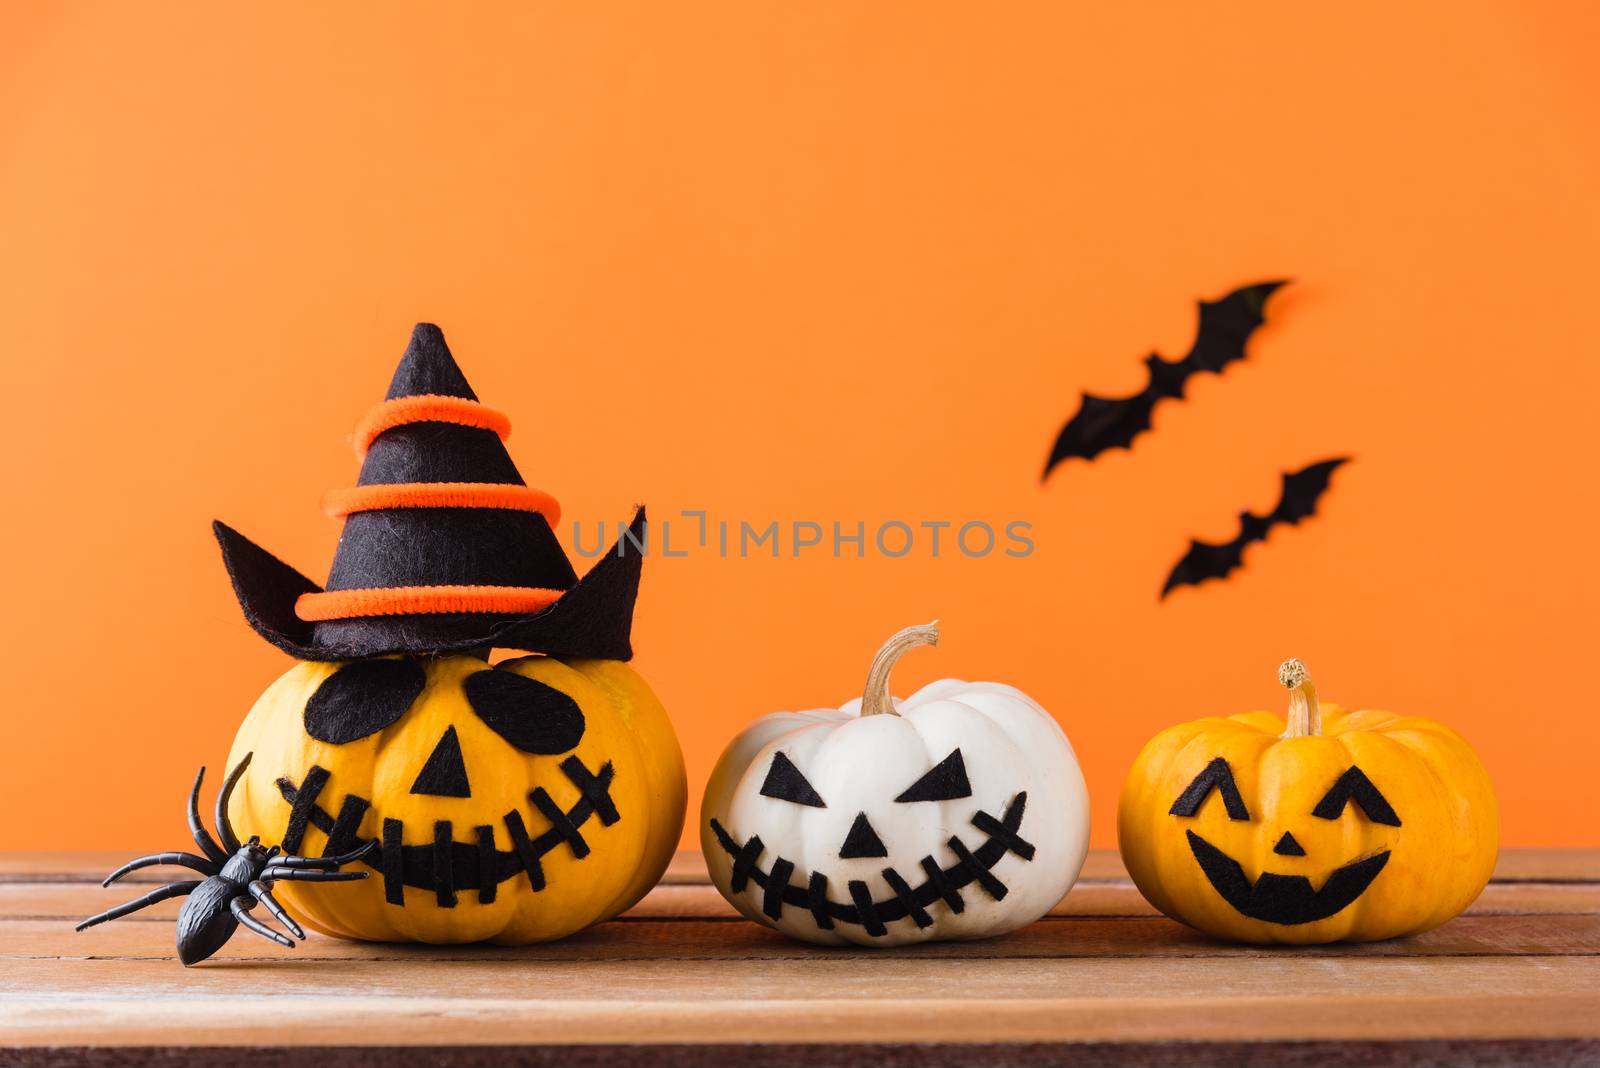 Funny Halloween day decoration ghost party by Sorapop